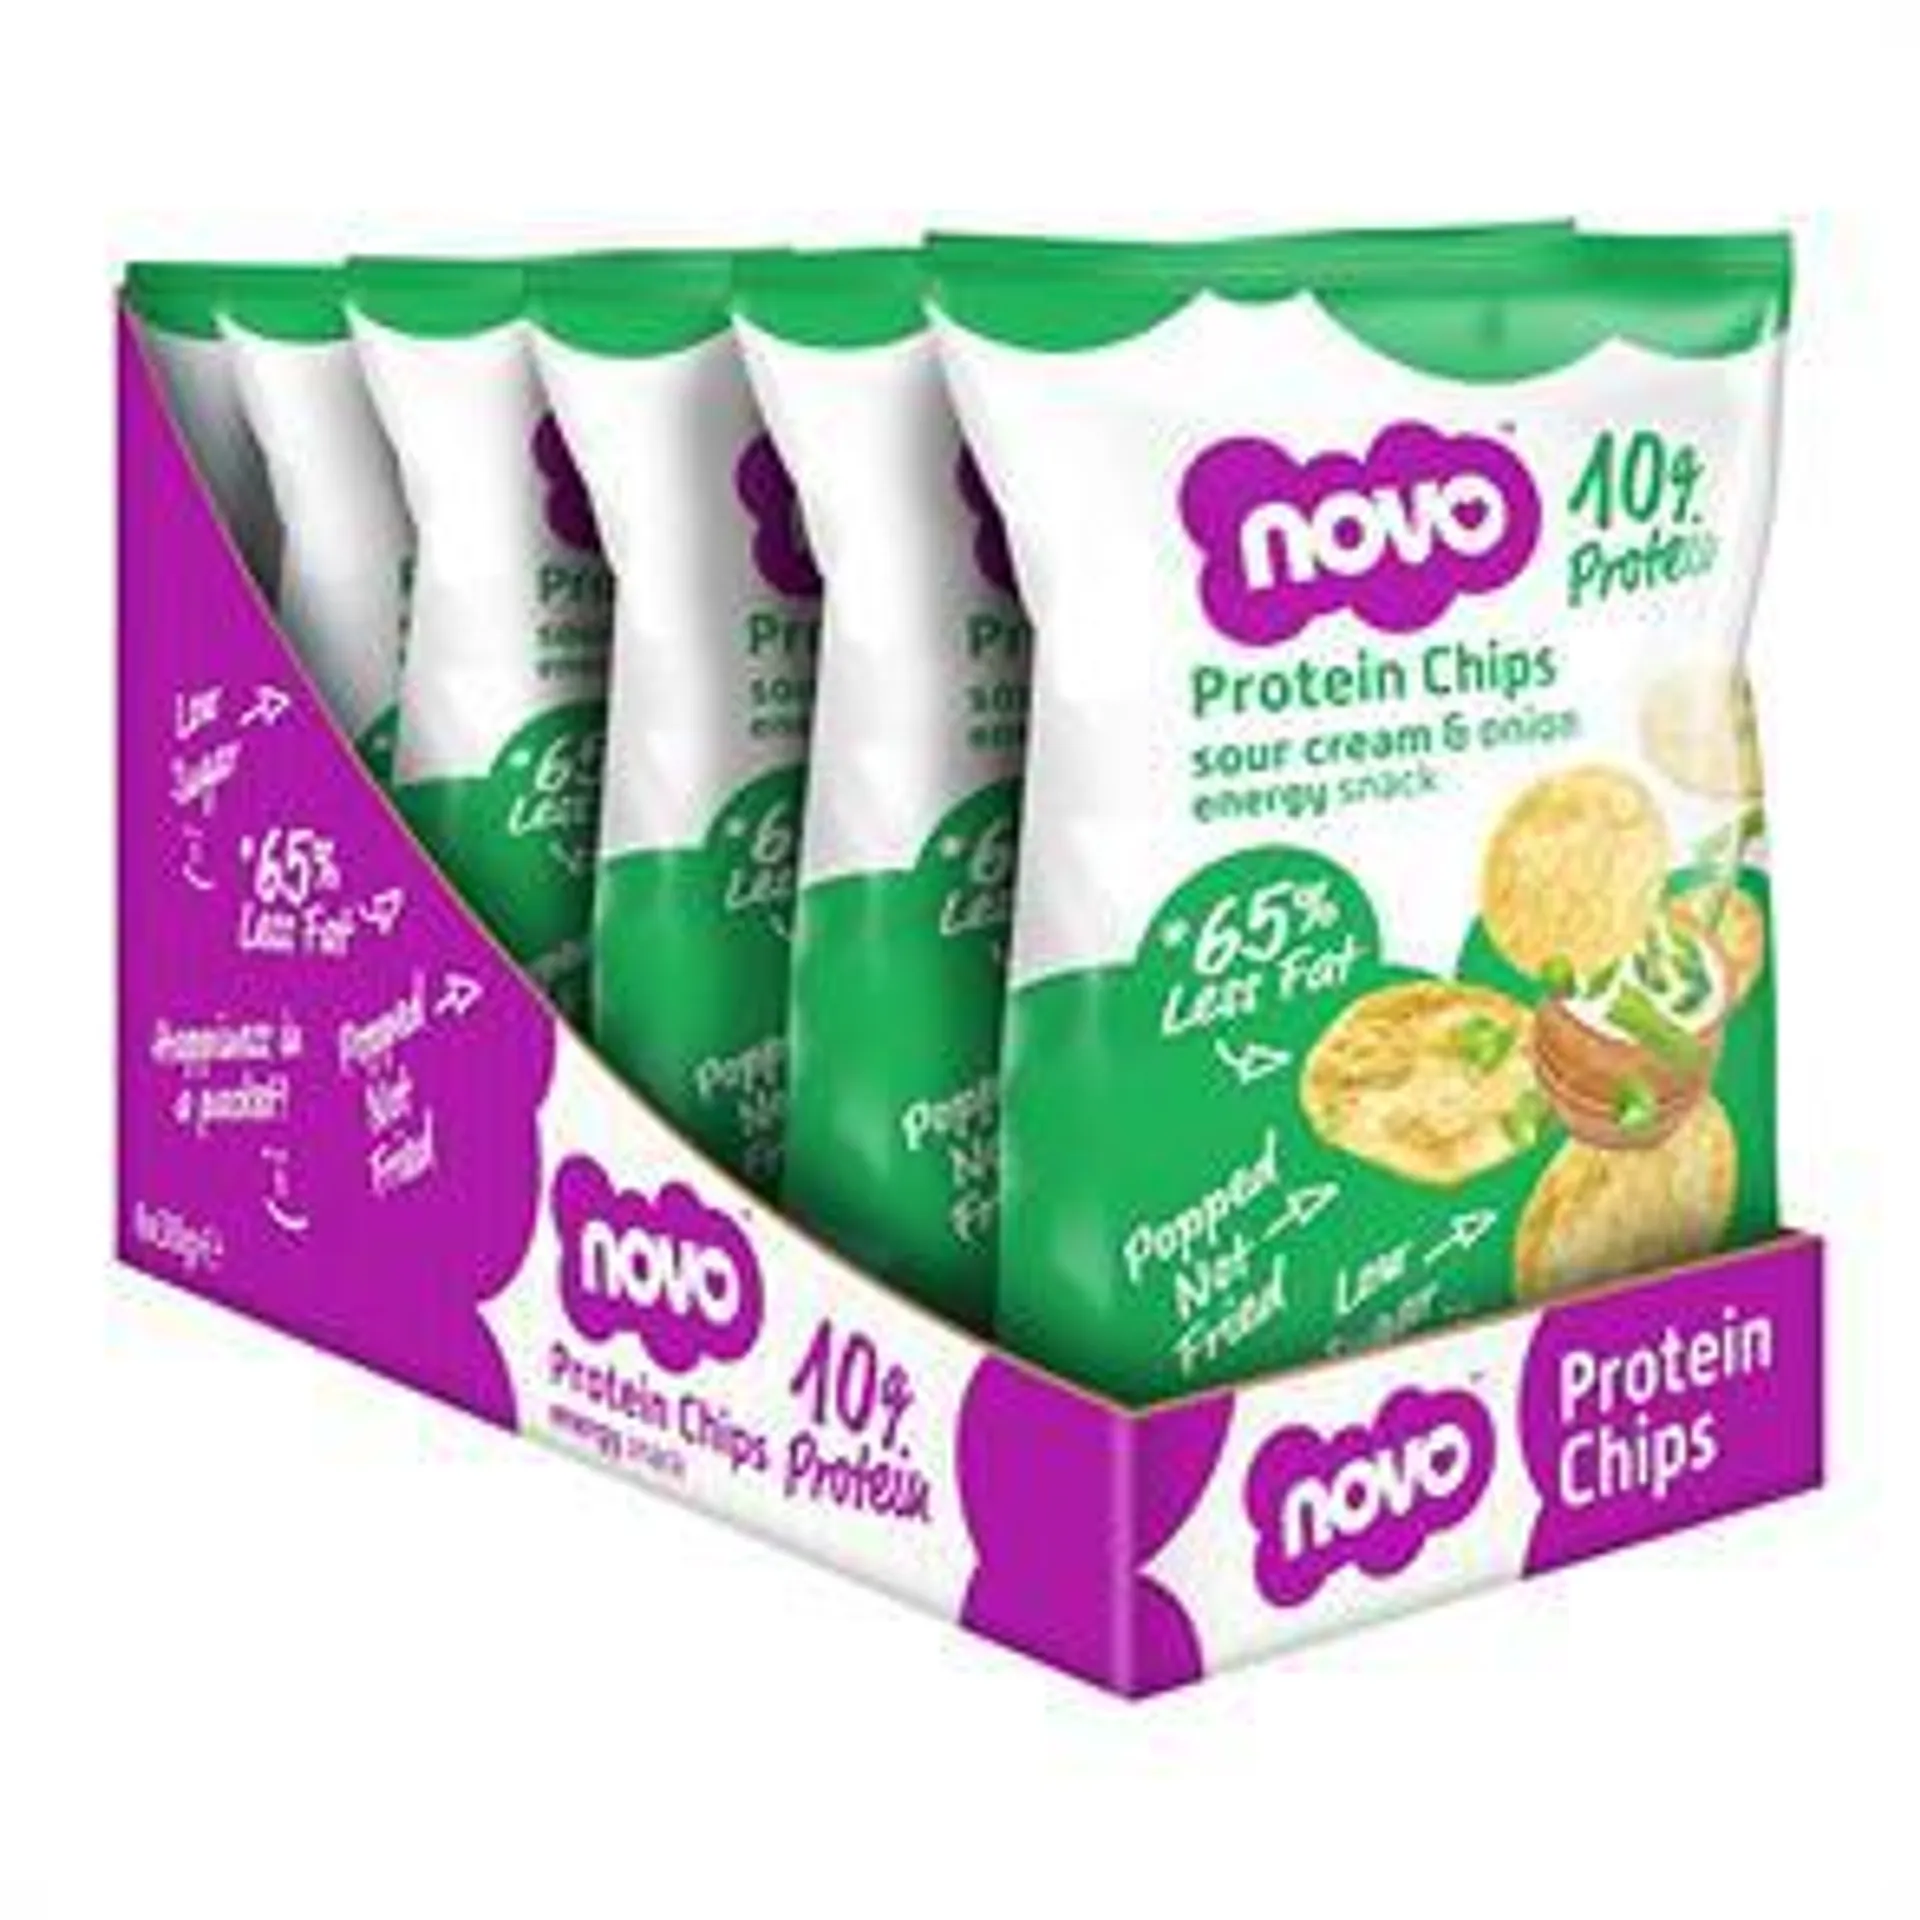 Novo Nutrition Protein Chips Energy Snacks 6 Pack - Sour Cream & Onion